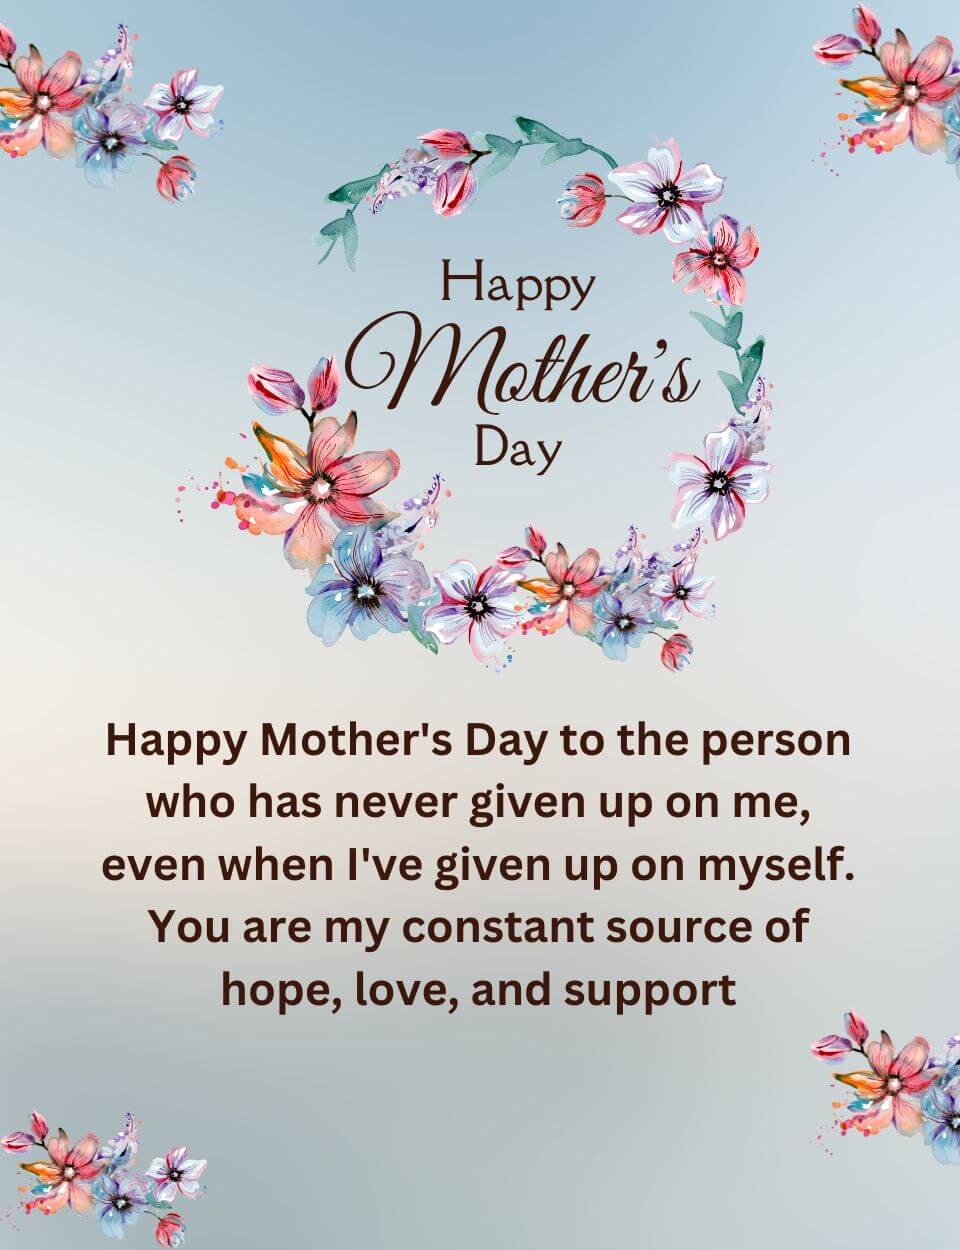 Happy Mothers Day Wishes Greeting Quote